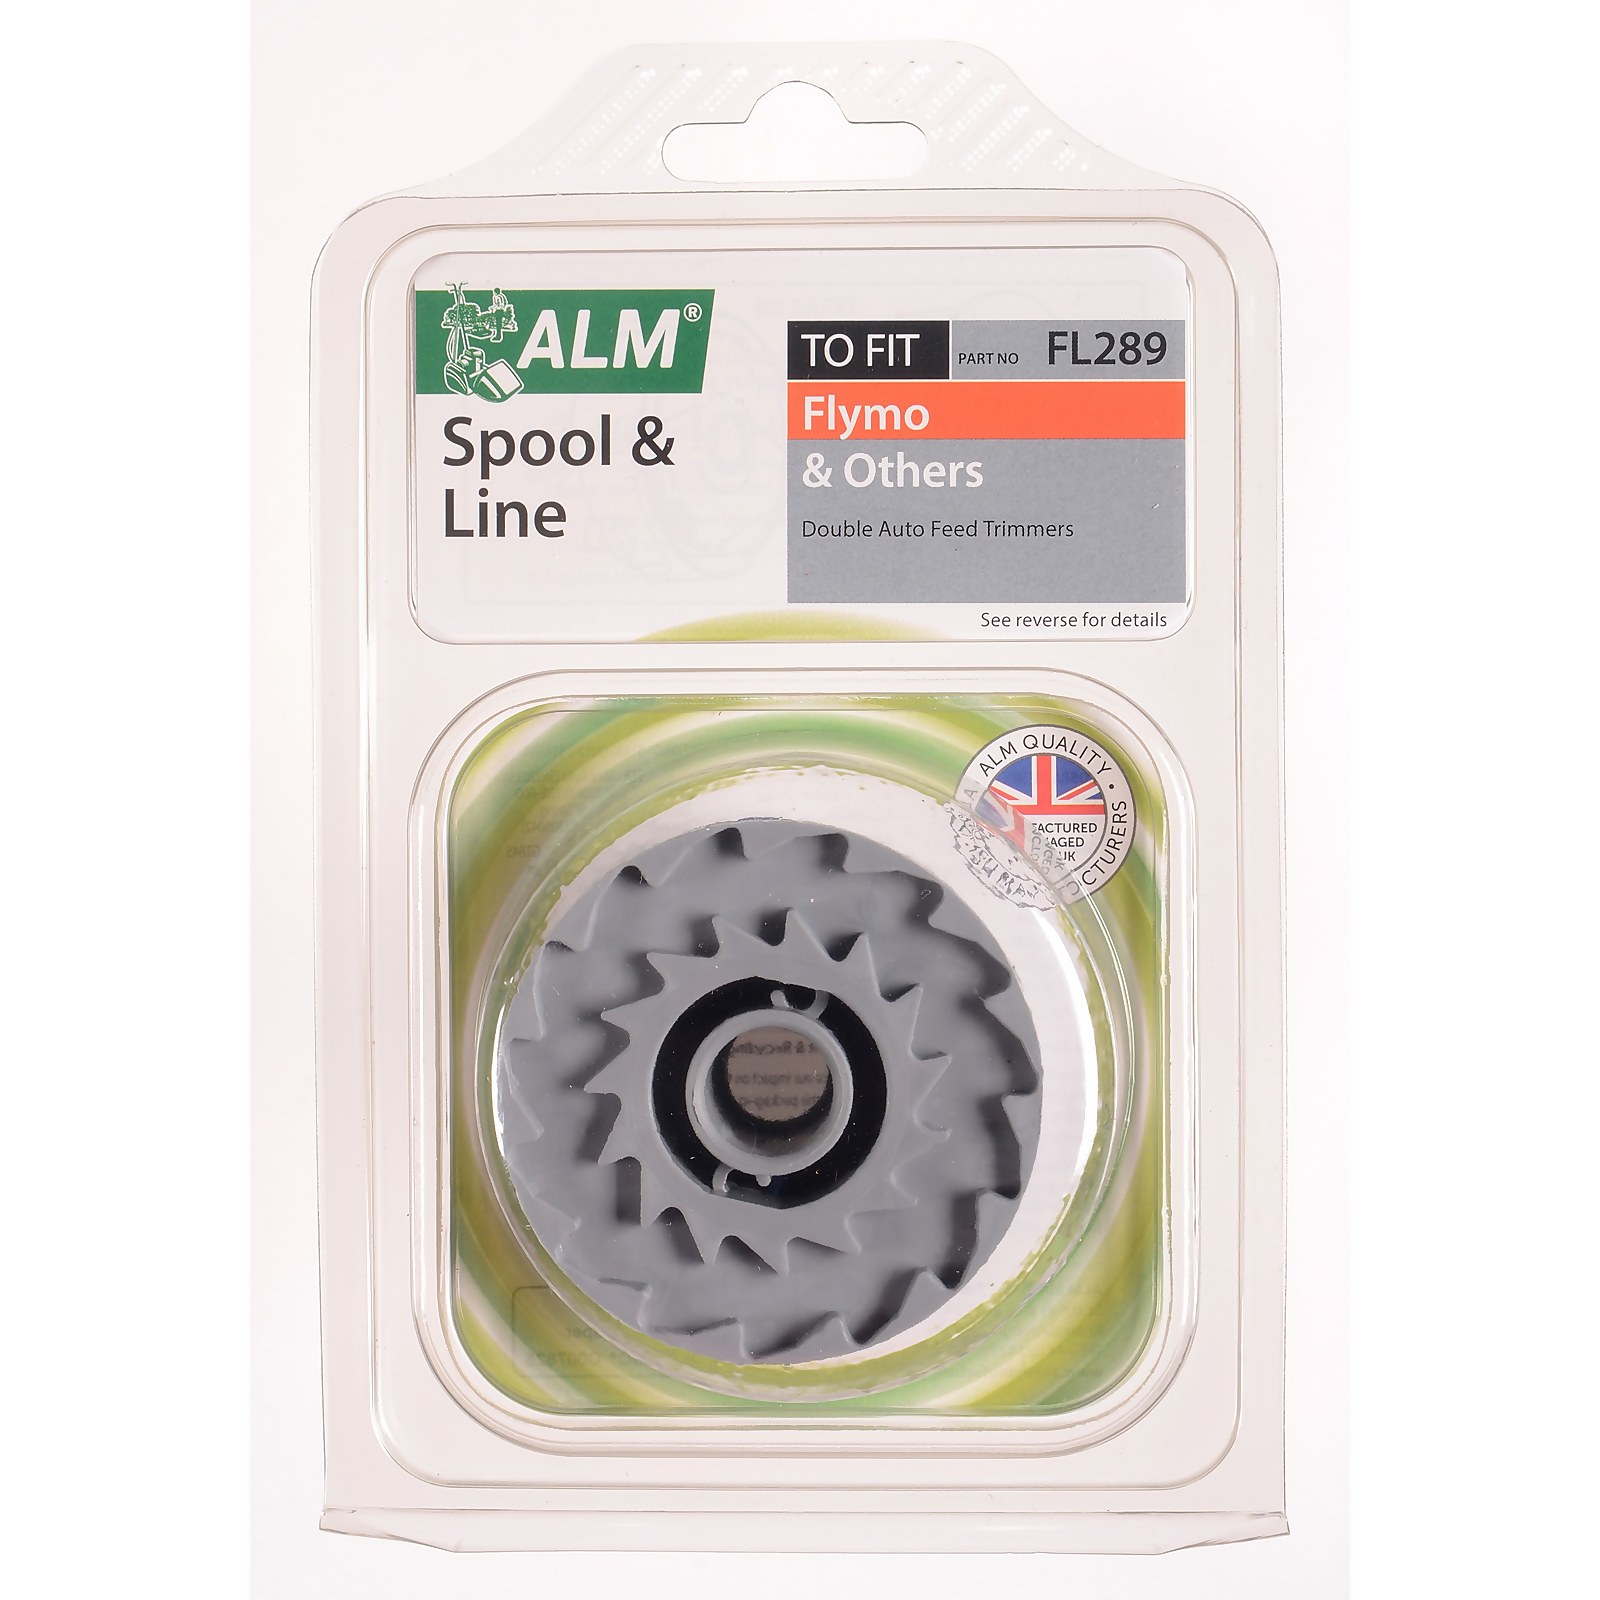 Photo of Alm Fl289 Replacement Spool & Line - Flymo Trimmers